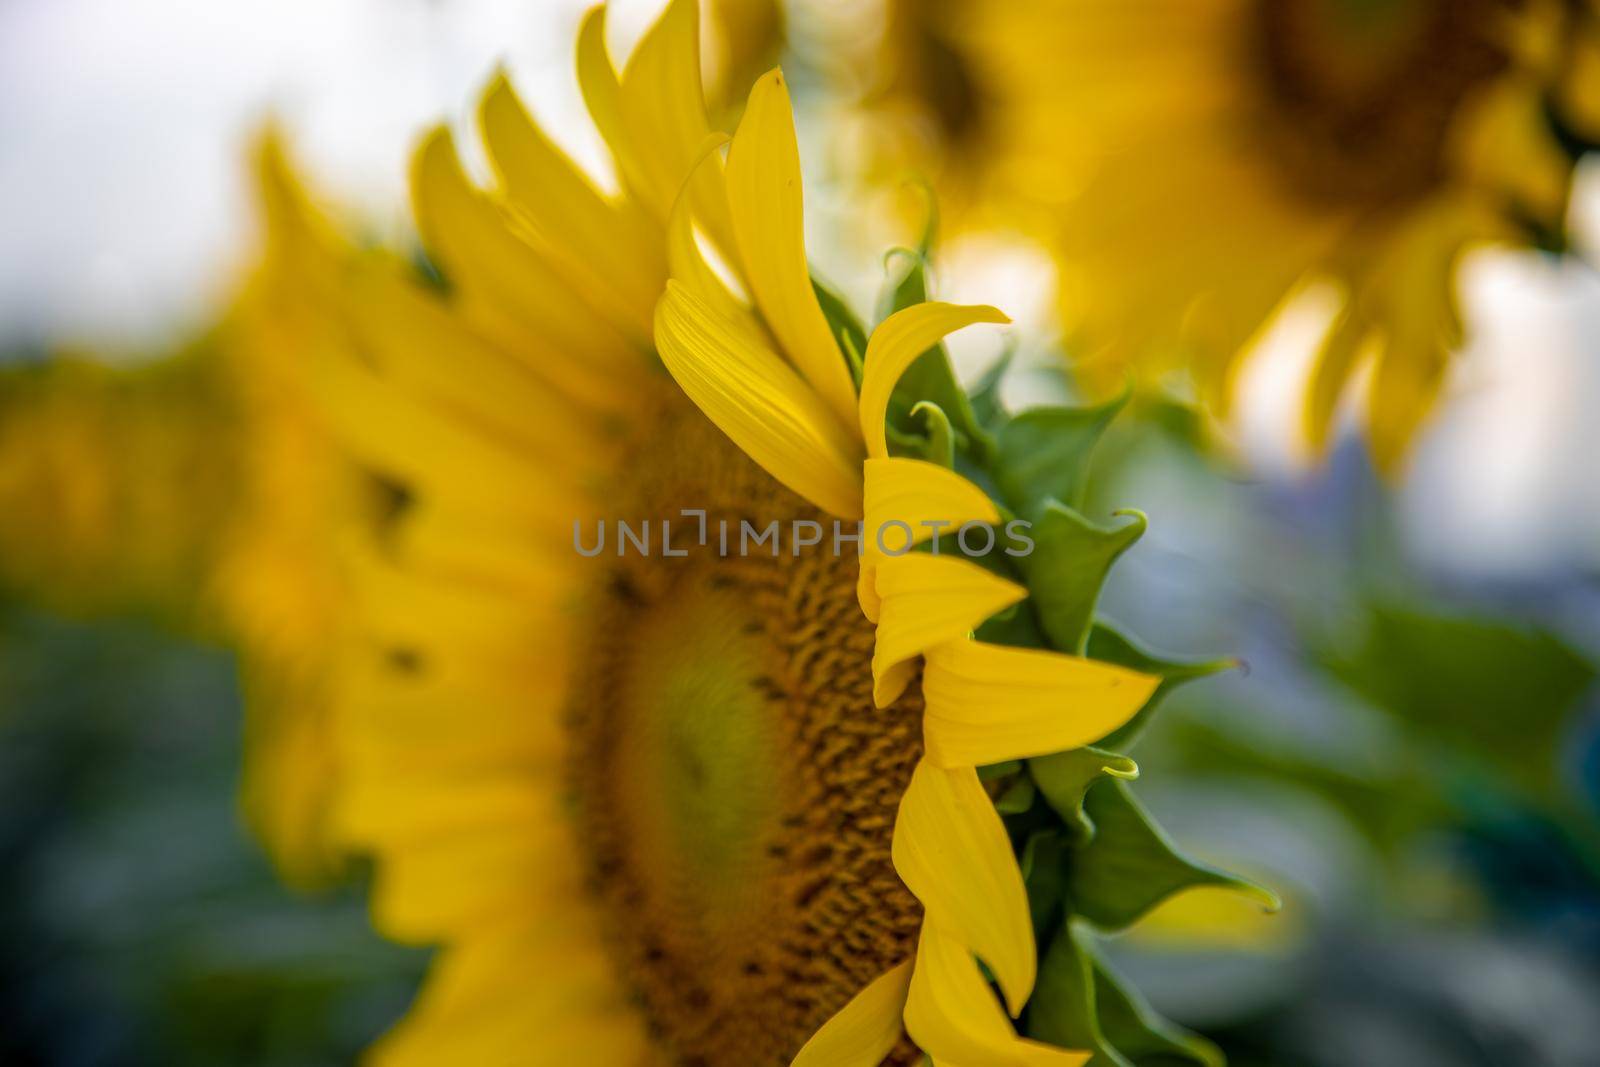 Sunflower circle big yellow flower warm Background reflective light from the sun concept of hope energy and enthusiasm for life